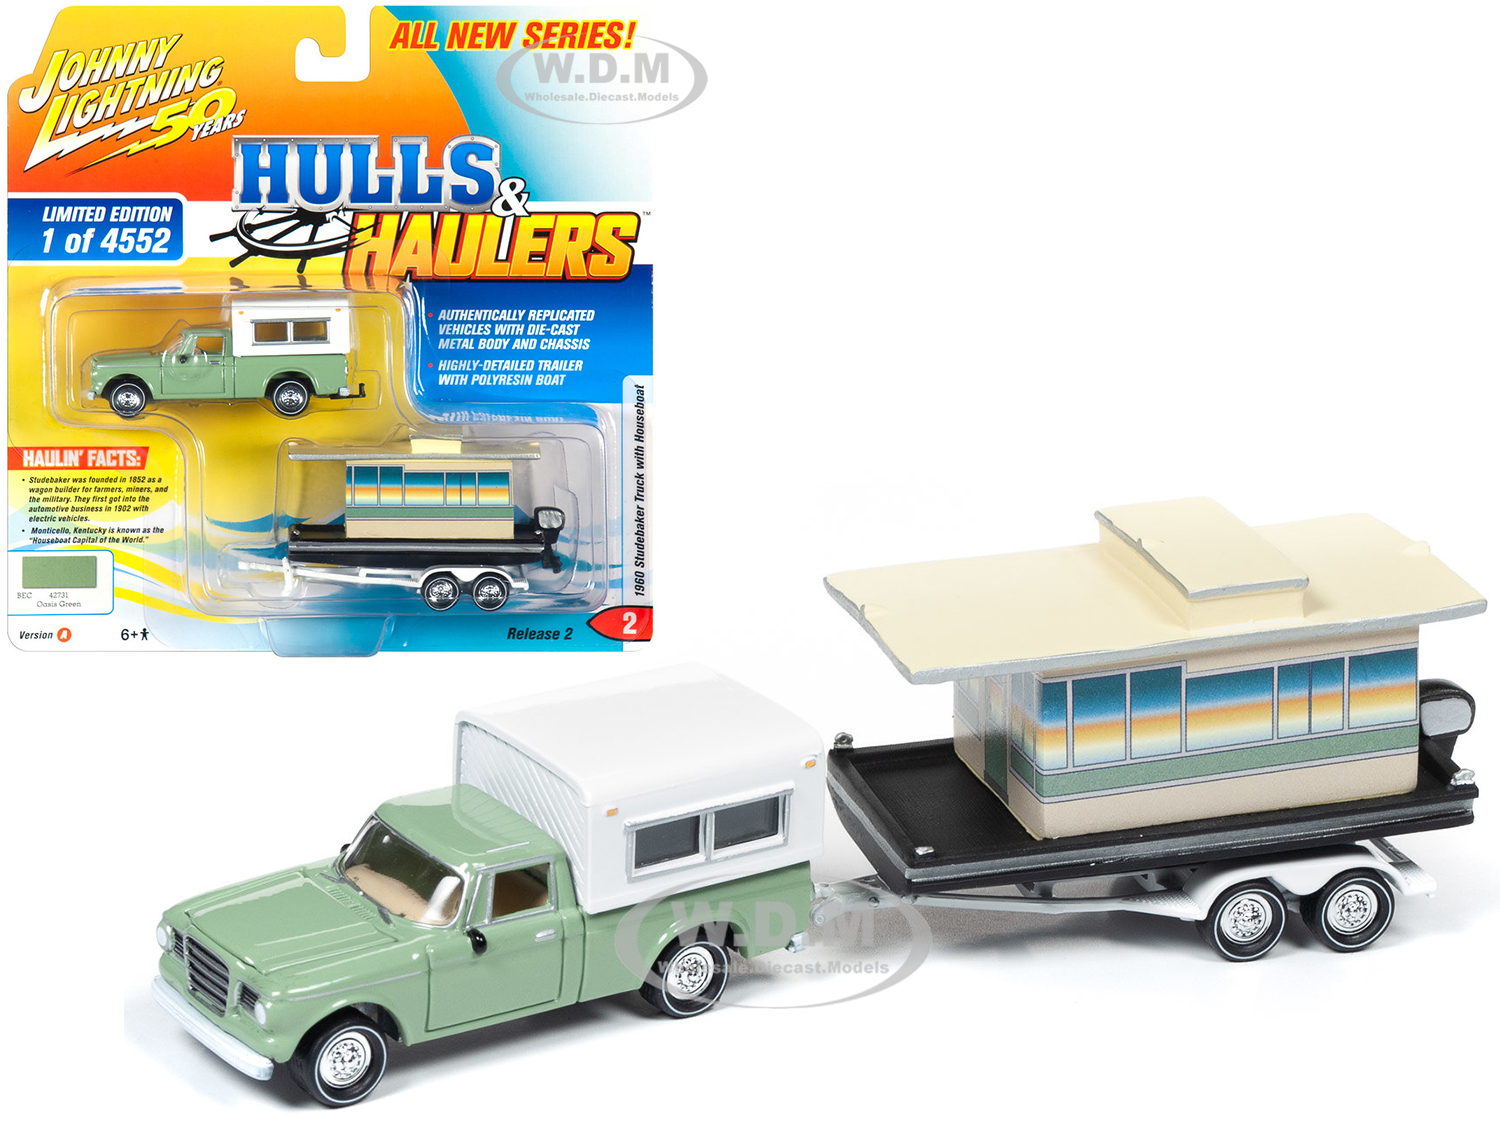 1960 Studebaker Pickup Truck With Camper Shell Oasis Green With Houseboat Limited Edition To 4552 Pieces Worldwide "hulls & Haulers" Series 2 "jo